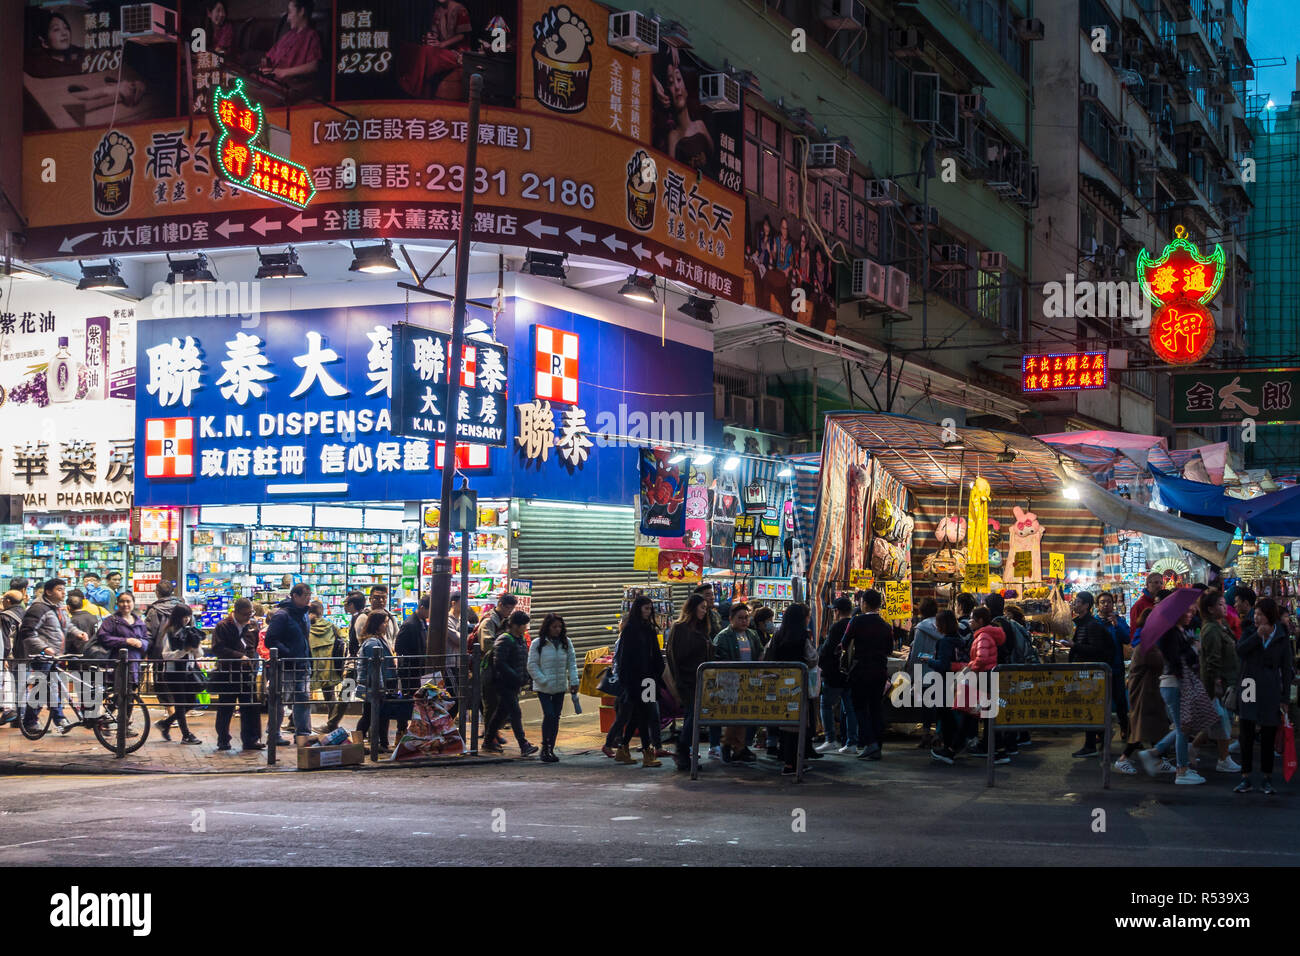 Nathan Road in Mong Kok area at late afternoon, full of people, street vendors and neon-lighted shops. Hong Kong, Kowloon, January 2018 Stock Photo